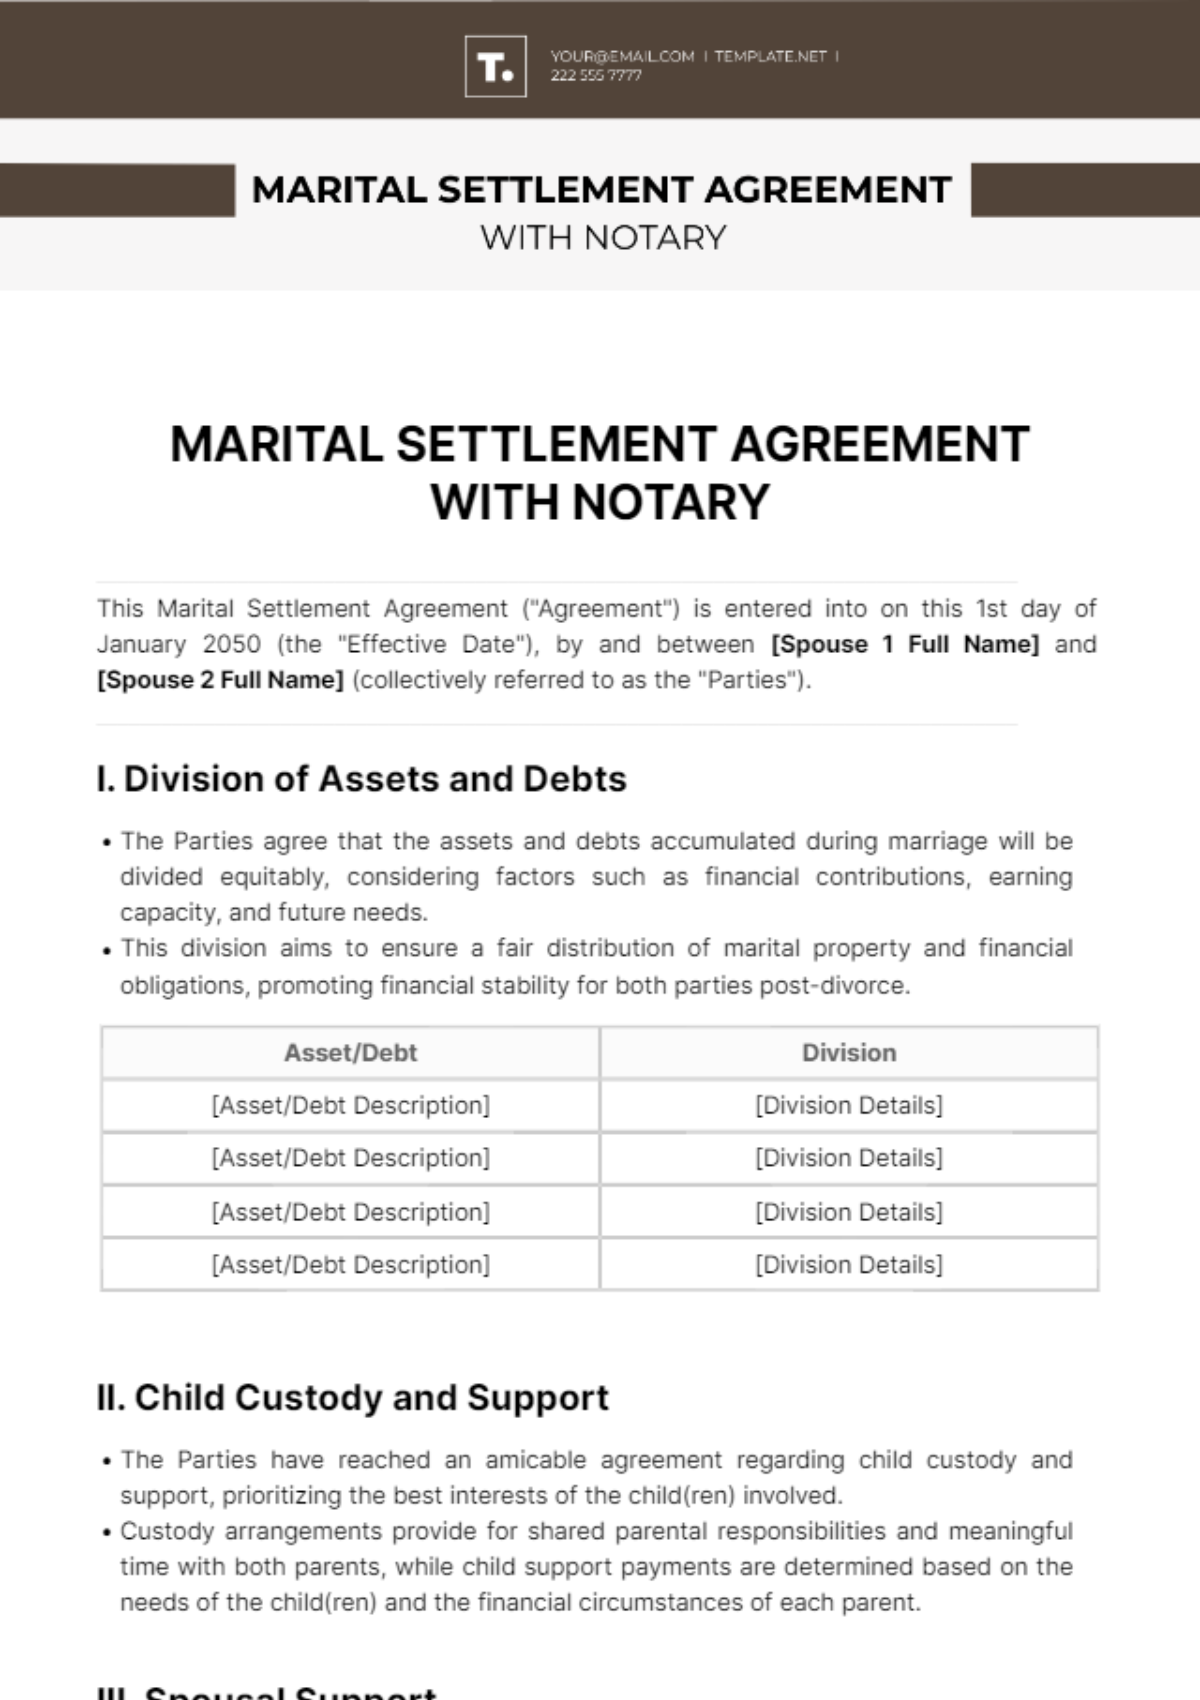 Marital Settlement Agreement With Notary Template